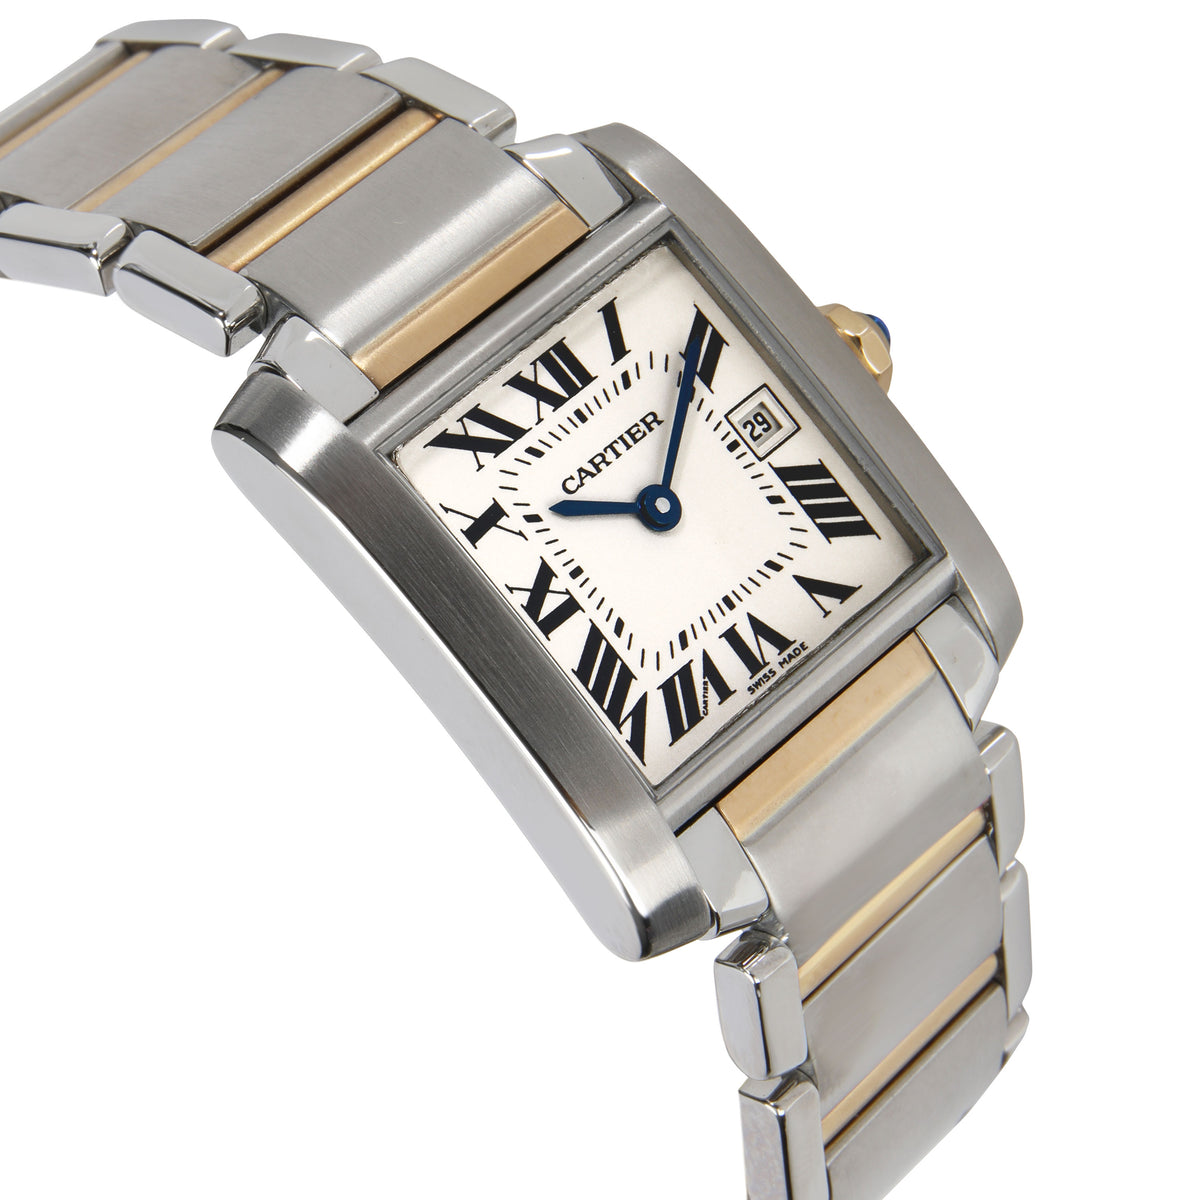 Cartier Tank Francaise W51012Q4 Unisex Watch in 18kt Stainless Steel/Yellow Gold